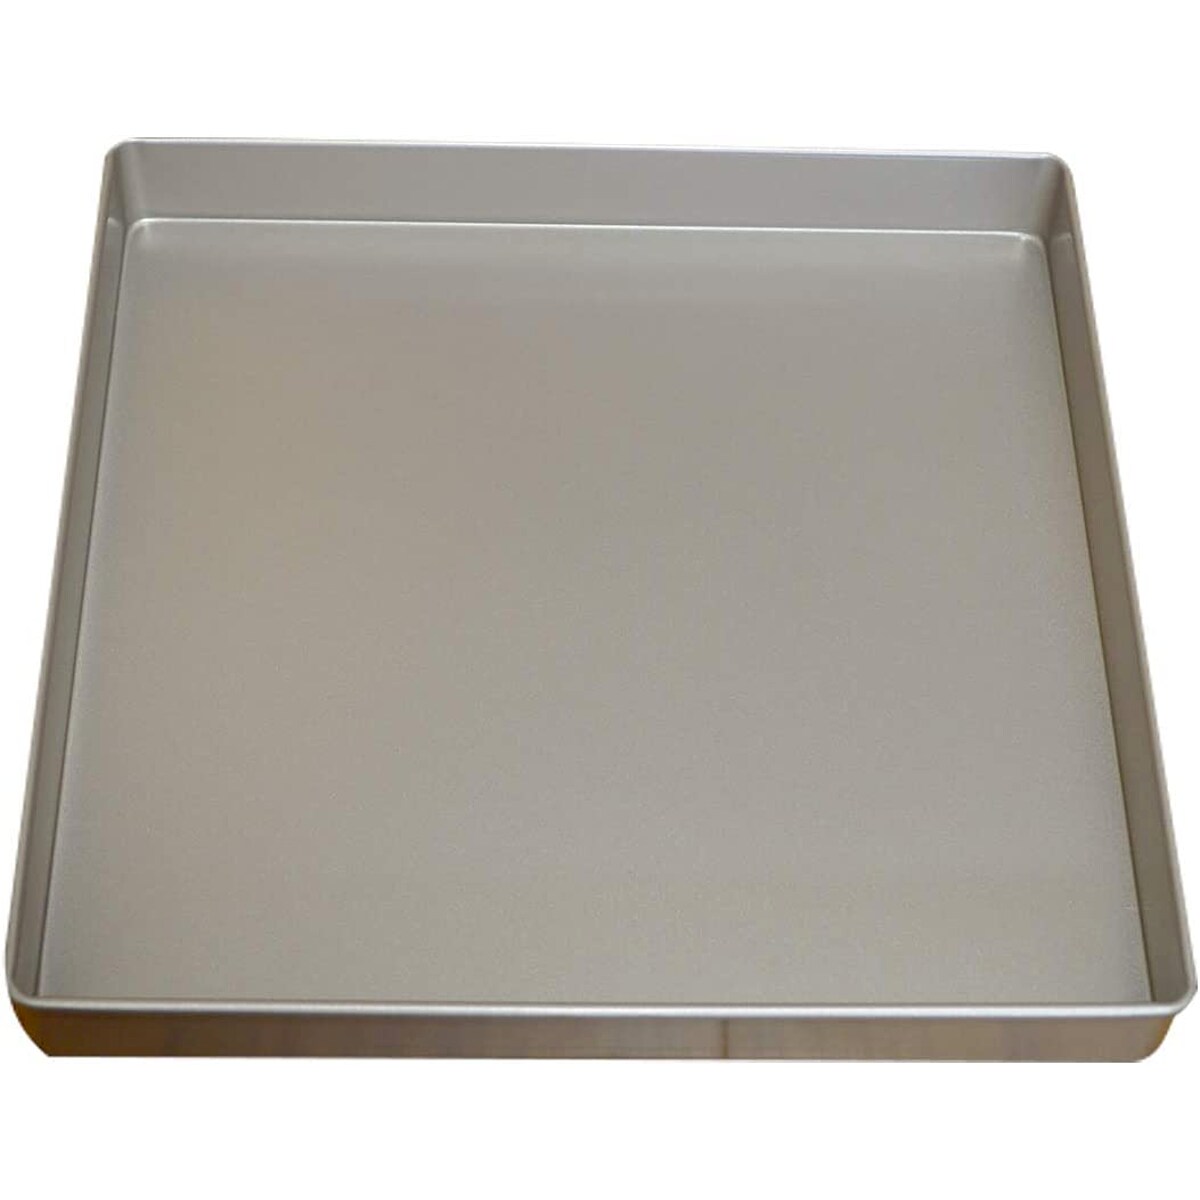 11x11 Inches Steel Oven Pan